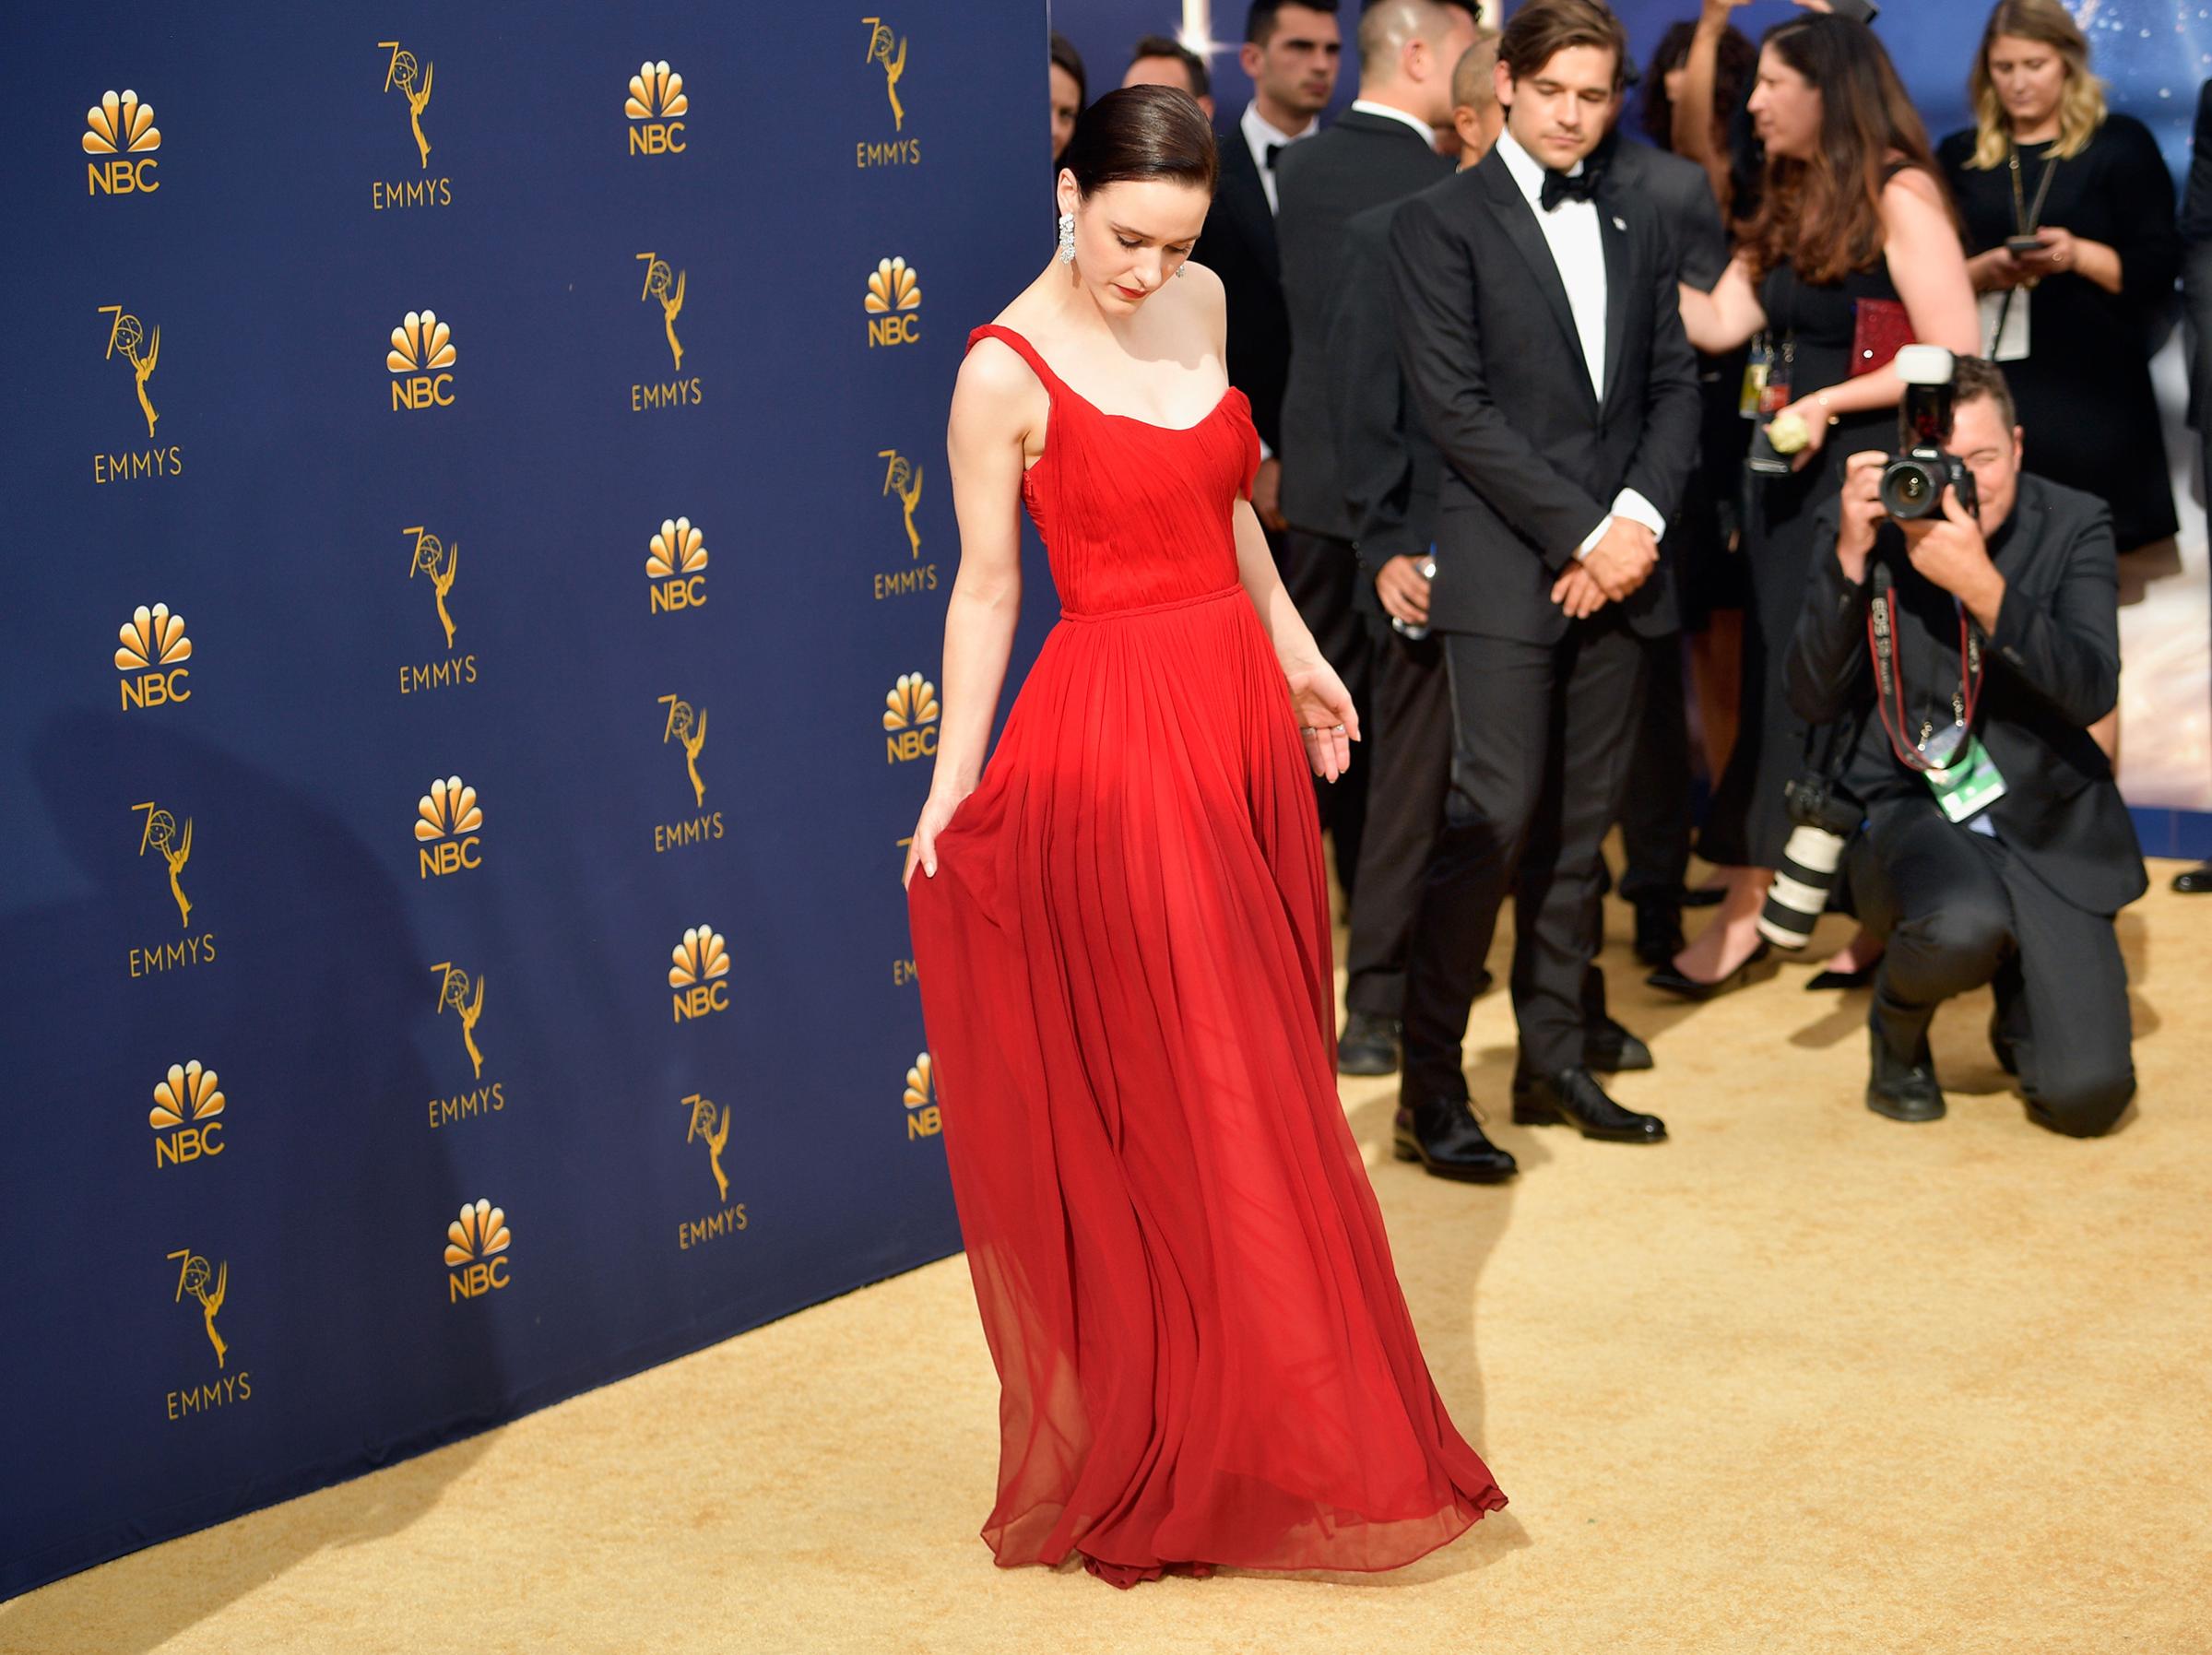 Rachel Brosnahan attends the 70th Emmy Awards on Sept. 17.